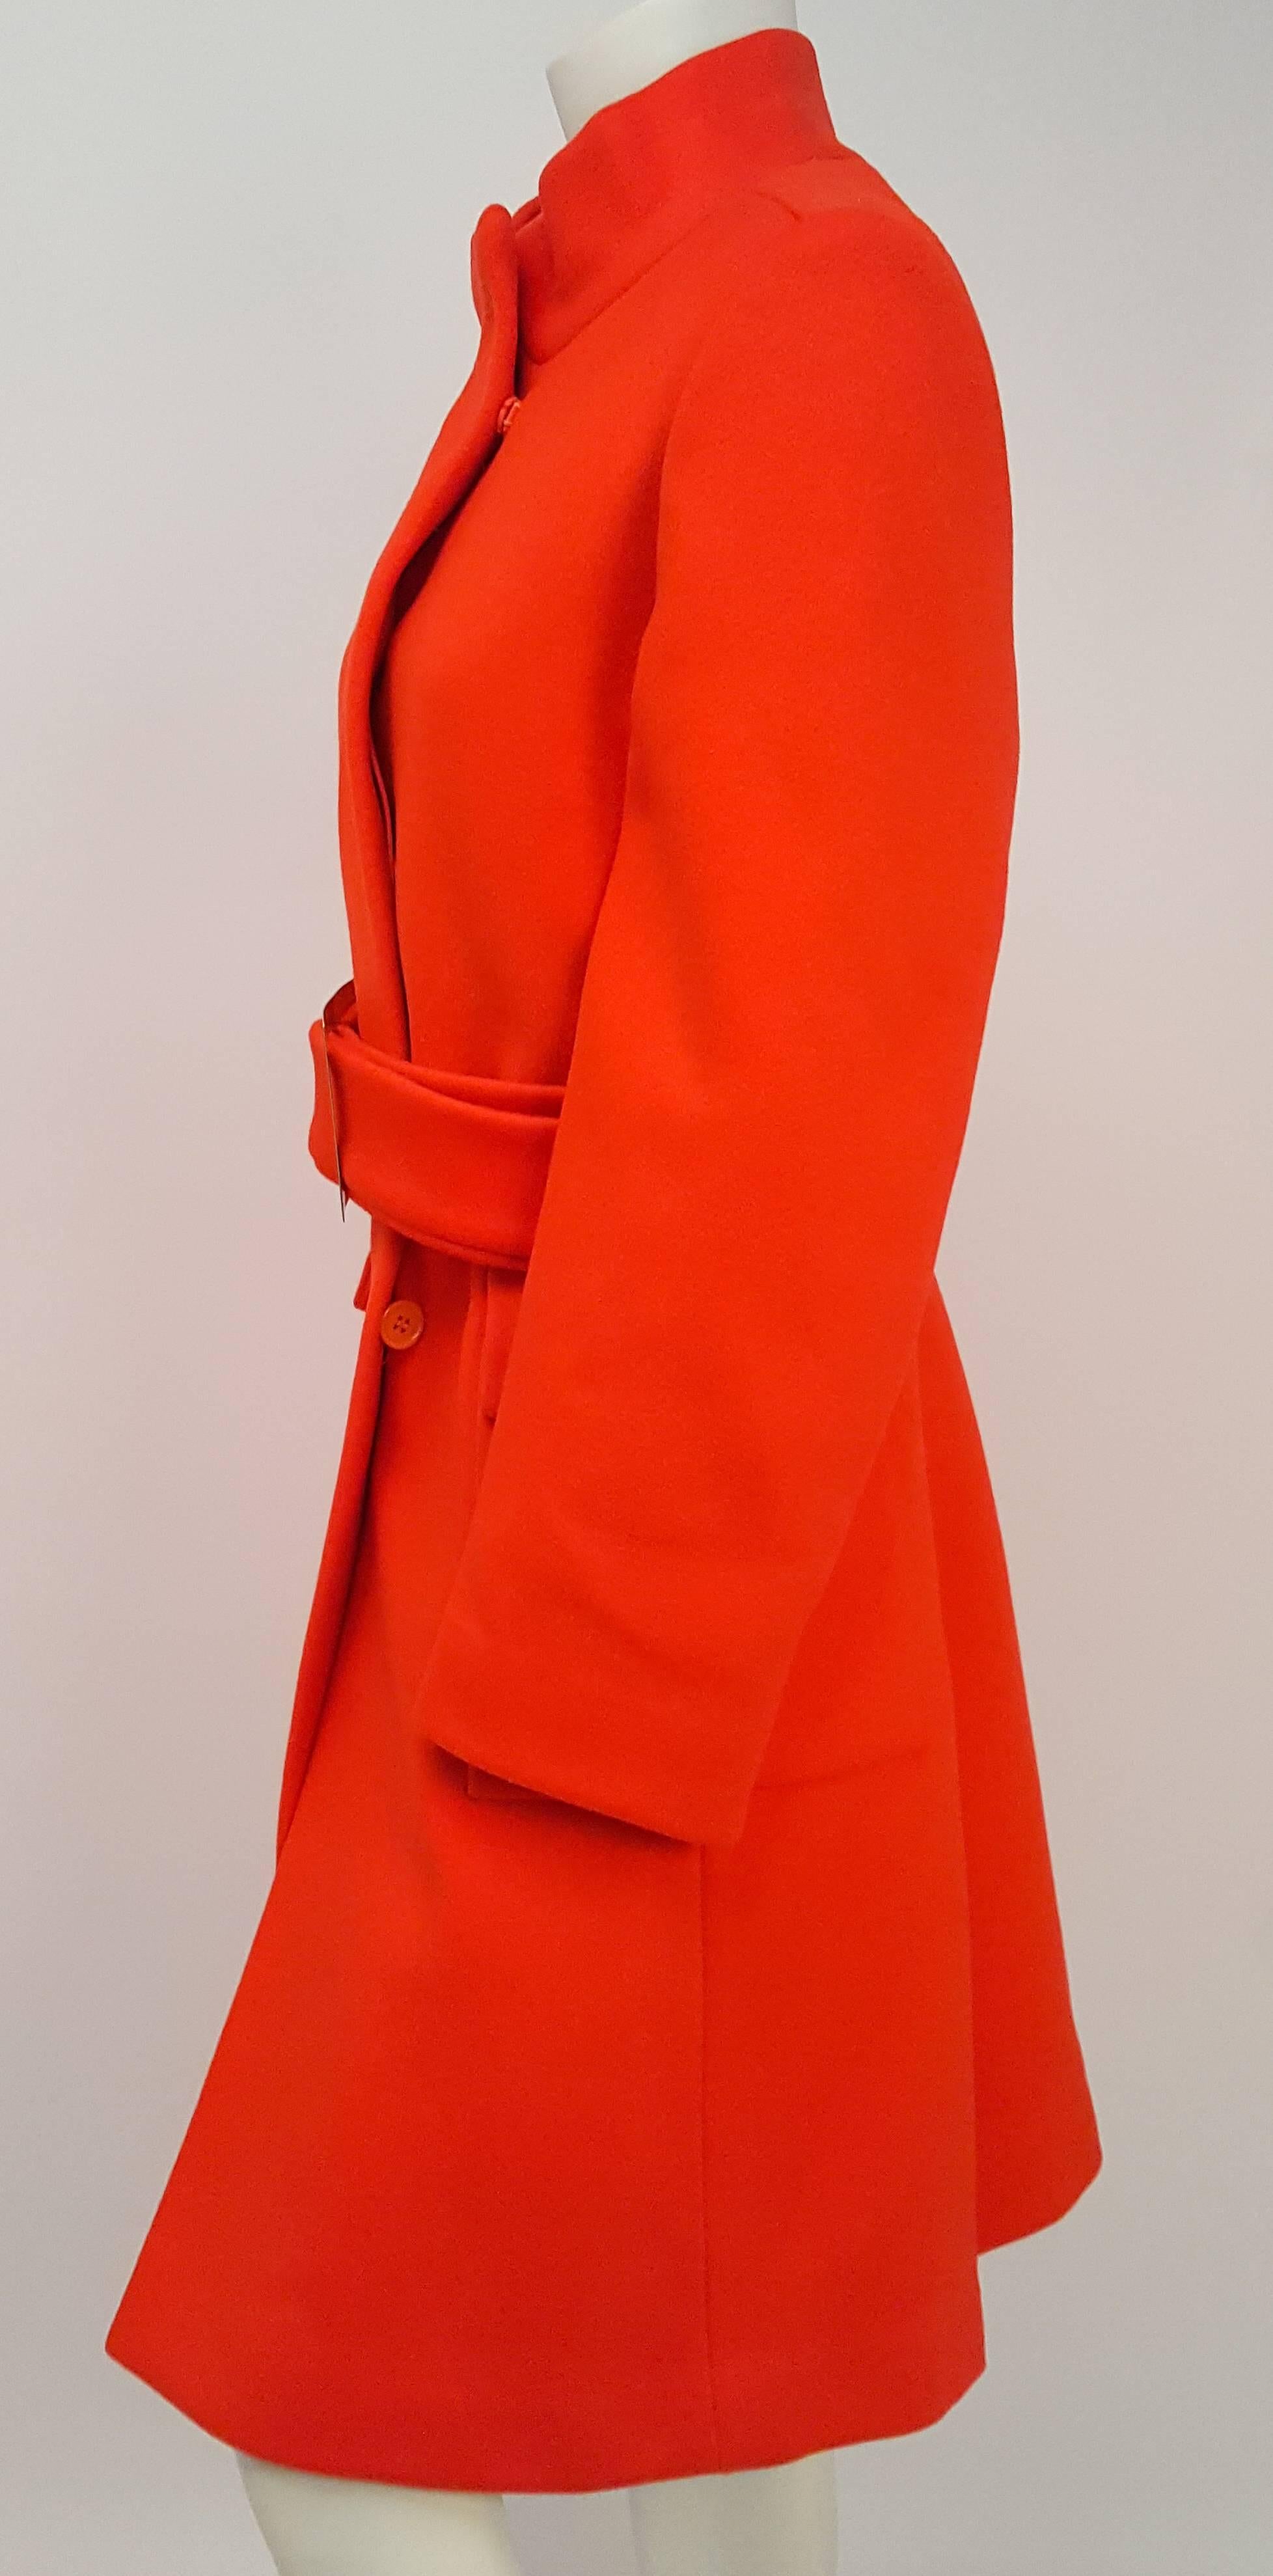 Calvin Klein 1970s Red Orange Coat w/ Belt. Hidden placket button and snap front closure. Front pockets. Fully lined. Aprox US Women's size 6-8.